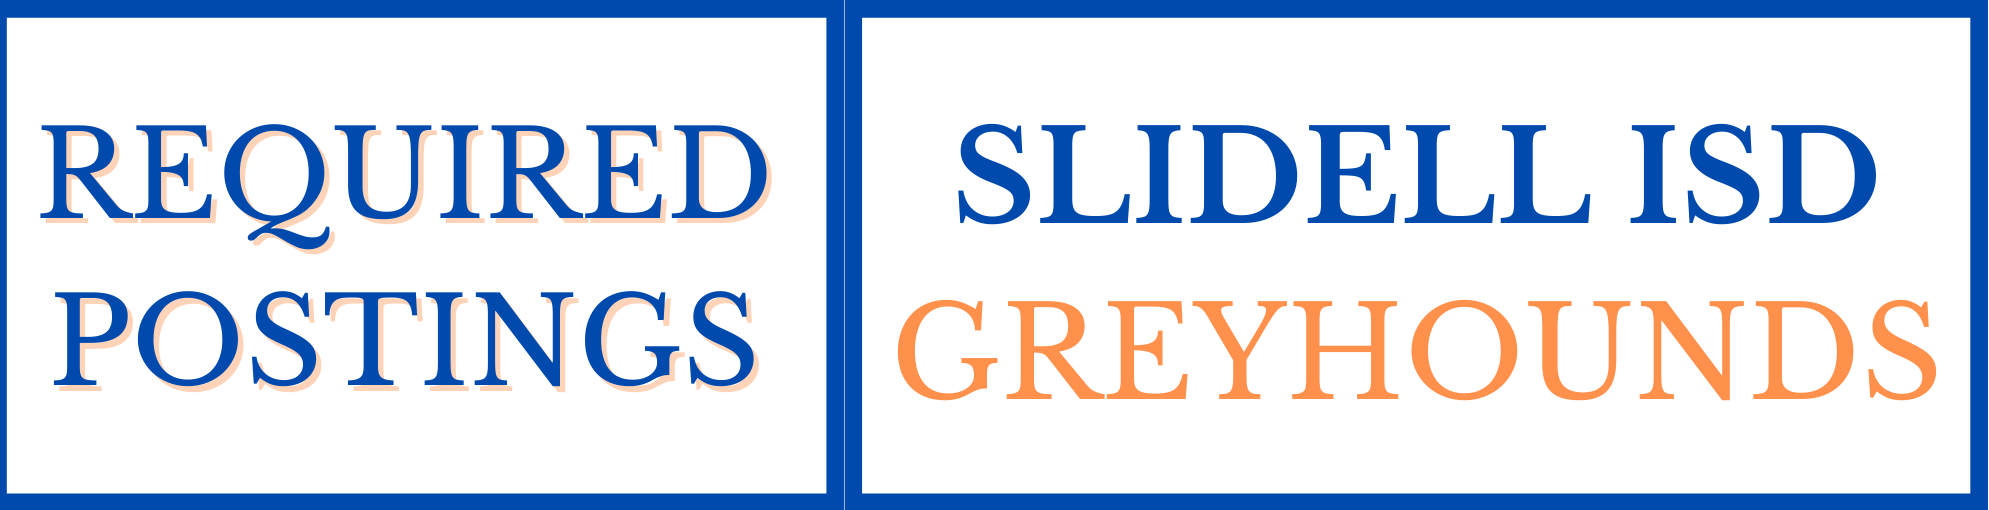 Required posting slidell greyhounds 